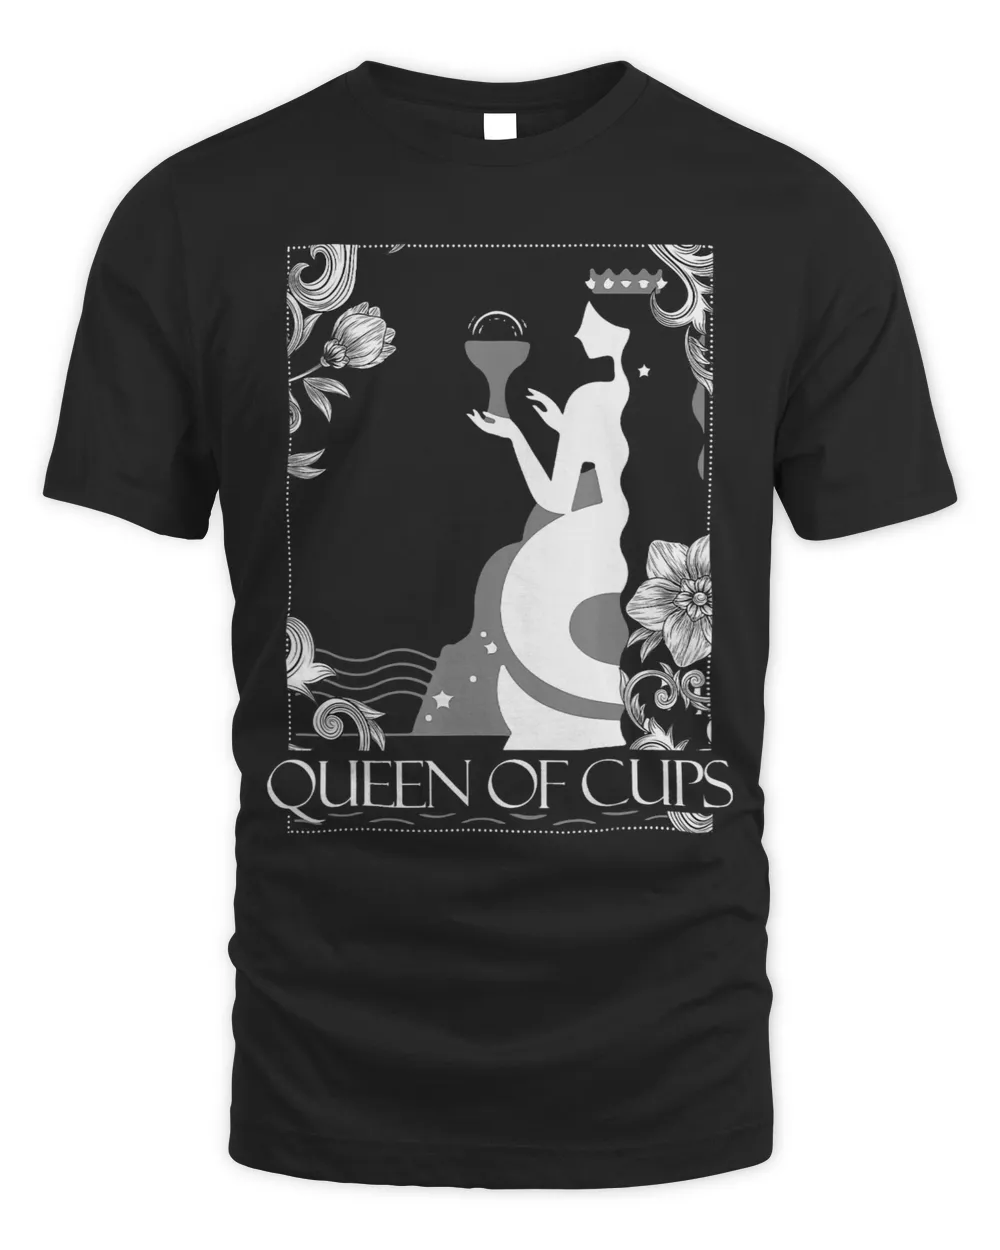 Tarot Card Shirt Queen of Cups Occult Scary Gothic